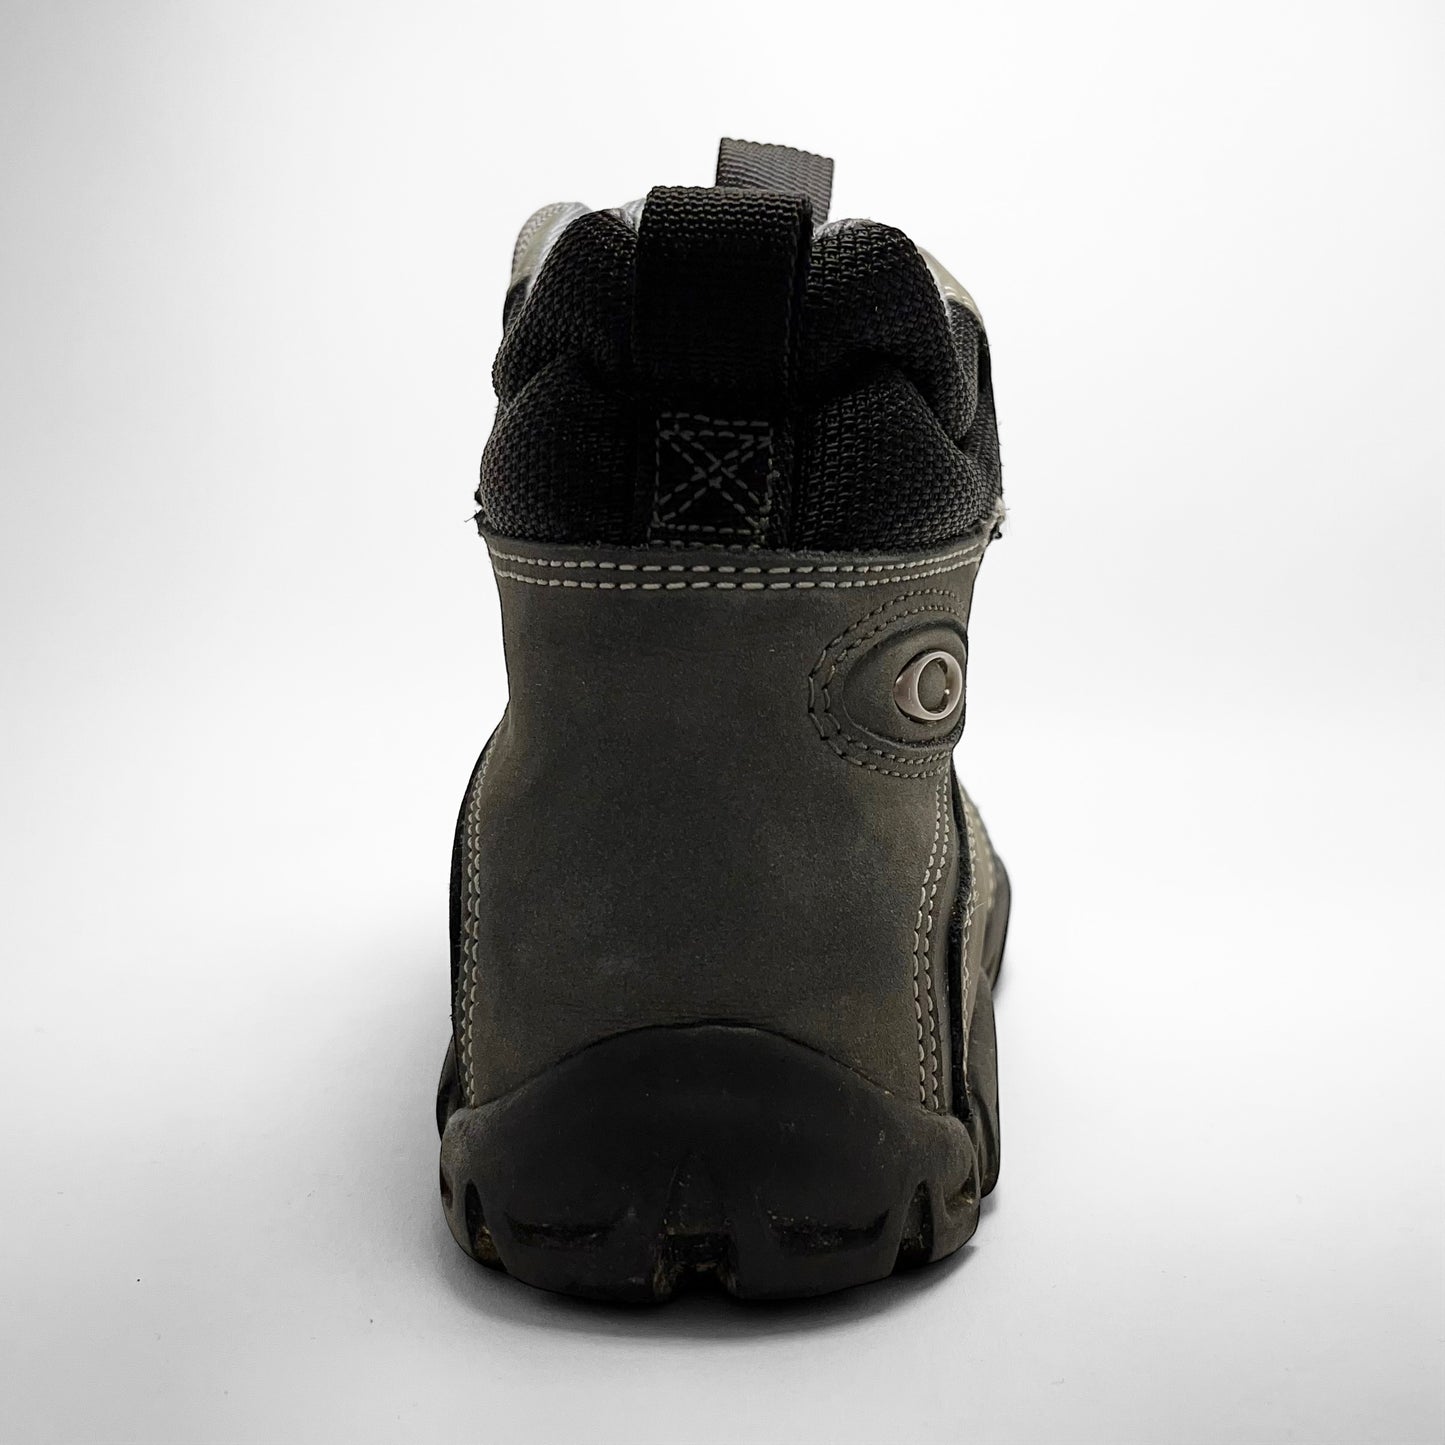 Oakley Tactical Field eVENT Boots (2005)